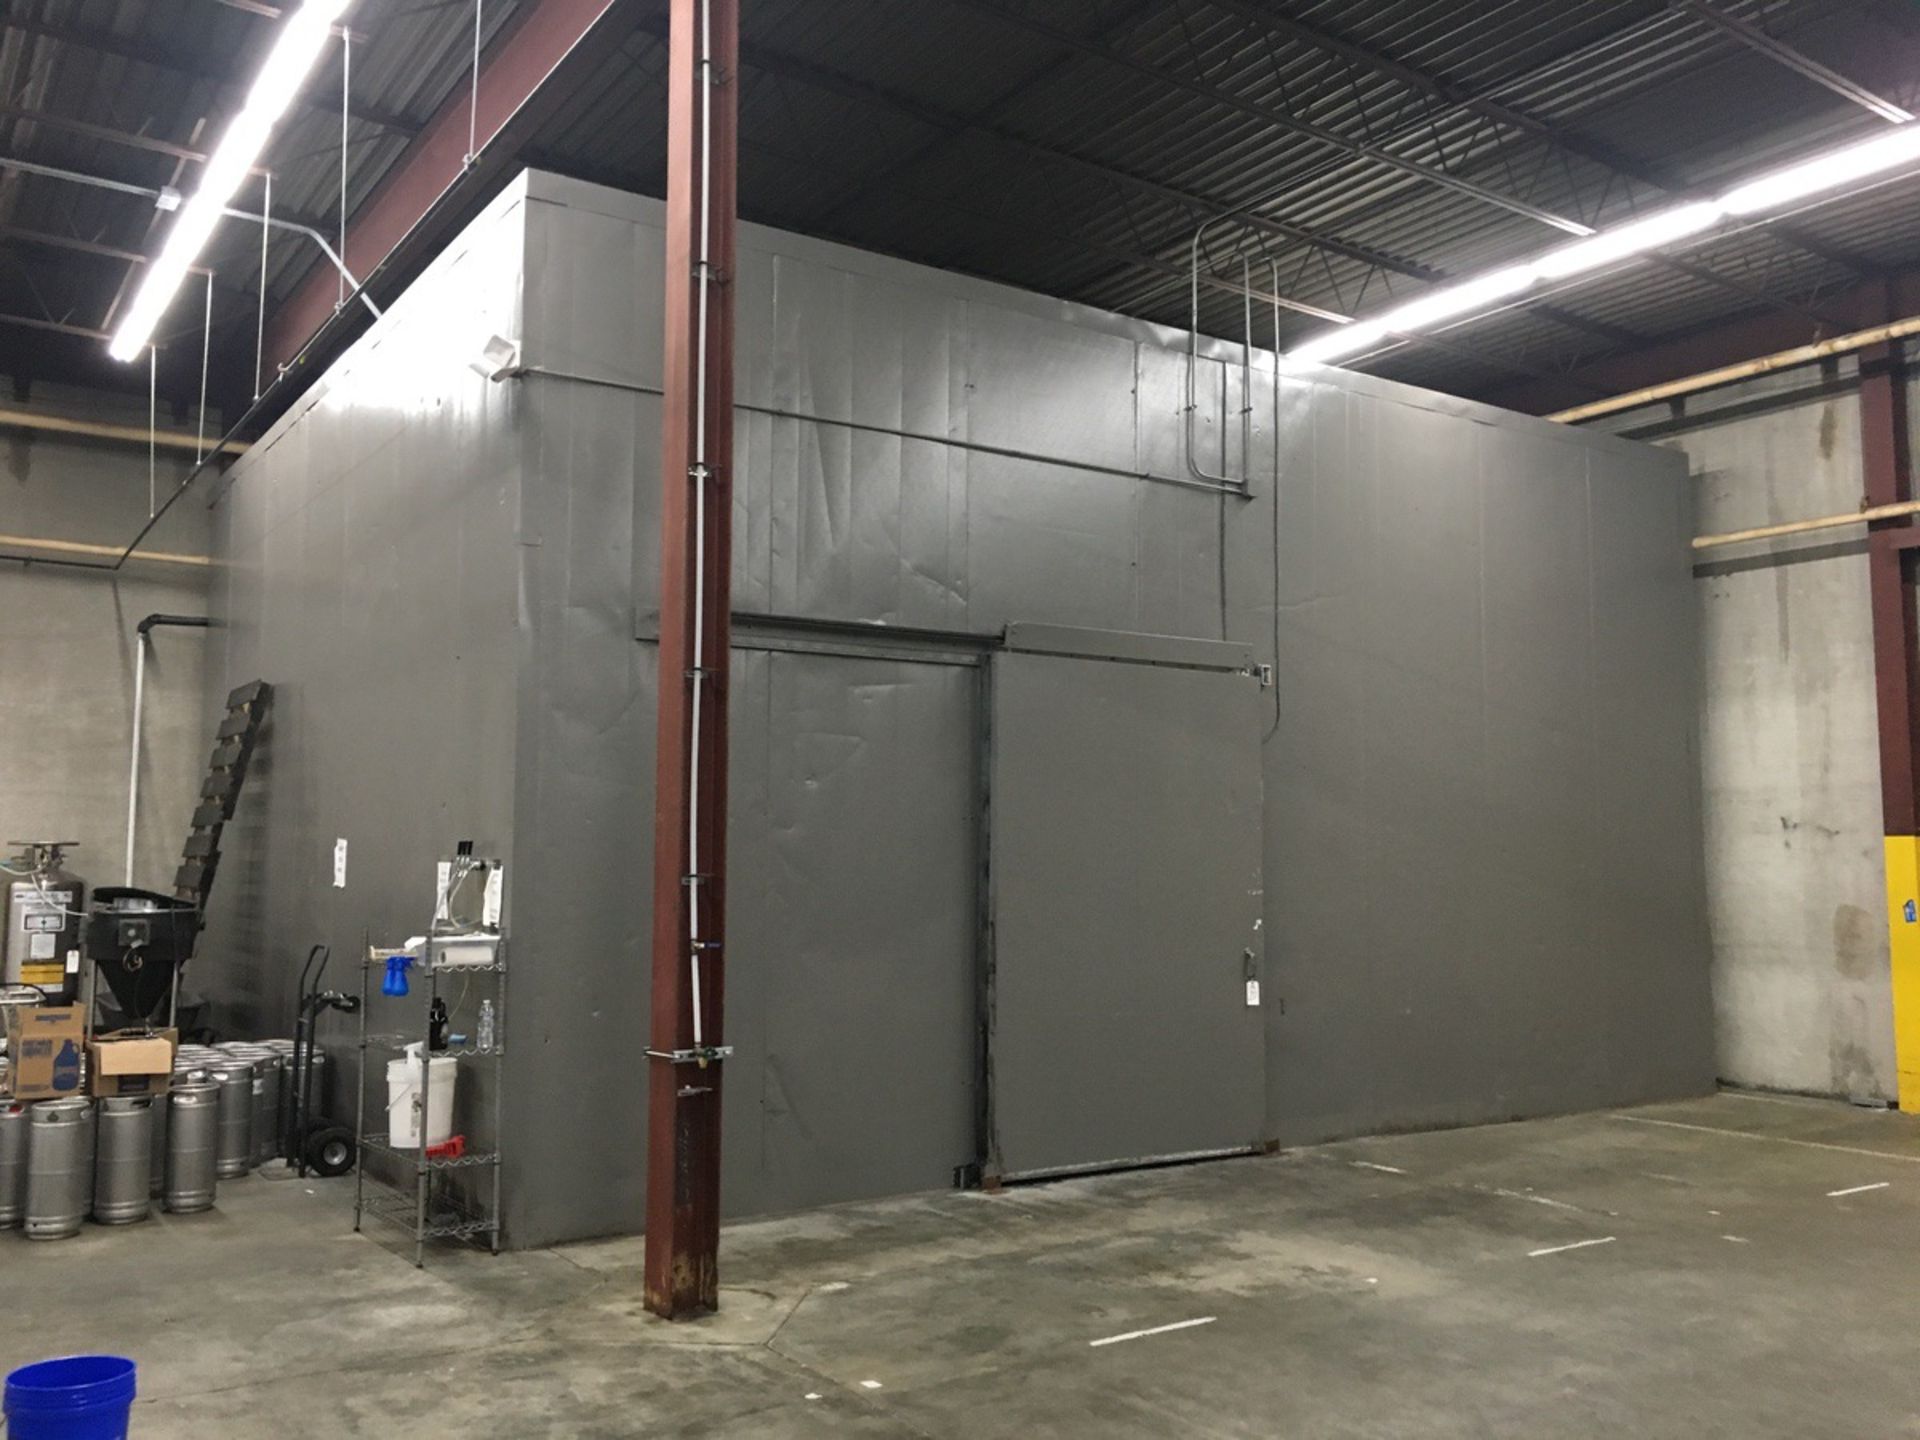 Walk-In Cooler, Approximately 30ft (door side) x 25ft Long x 18ft Tall, (2) Trenton | Rig Fee: $8100